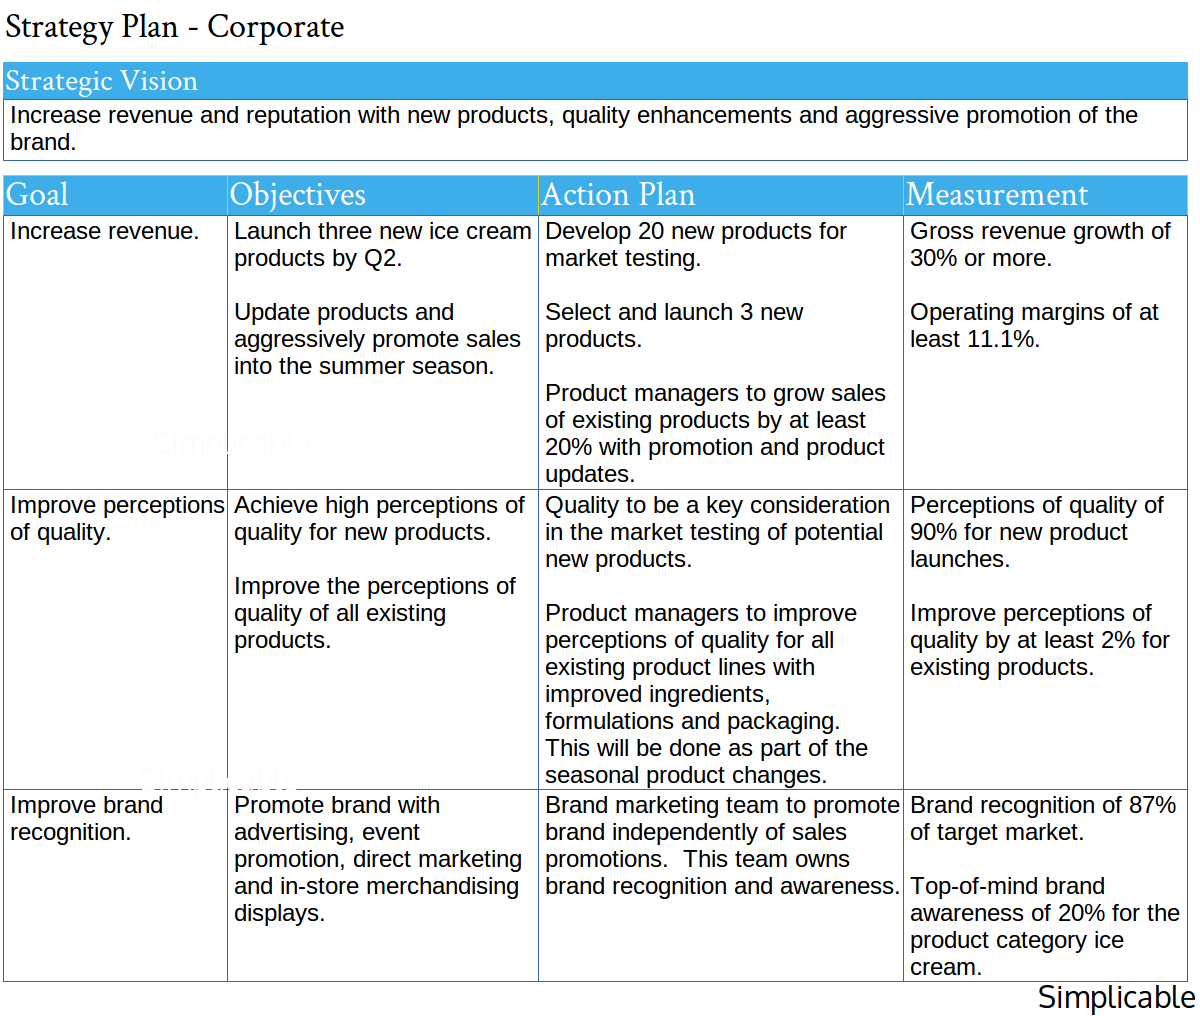 corporate strategy plan